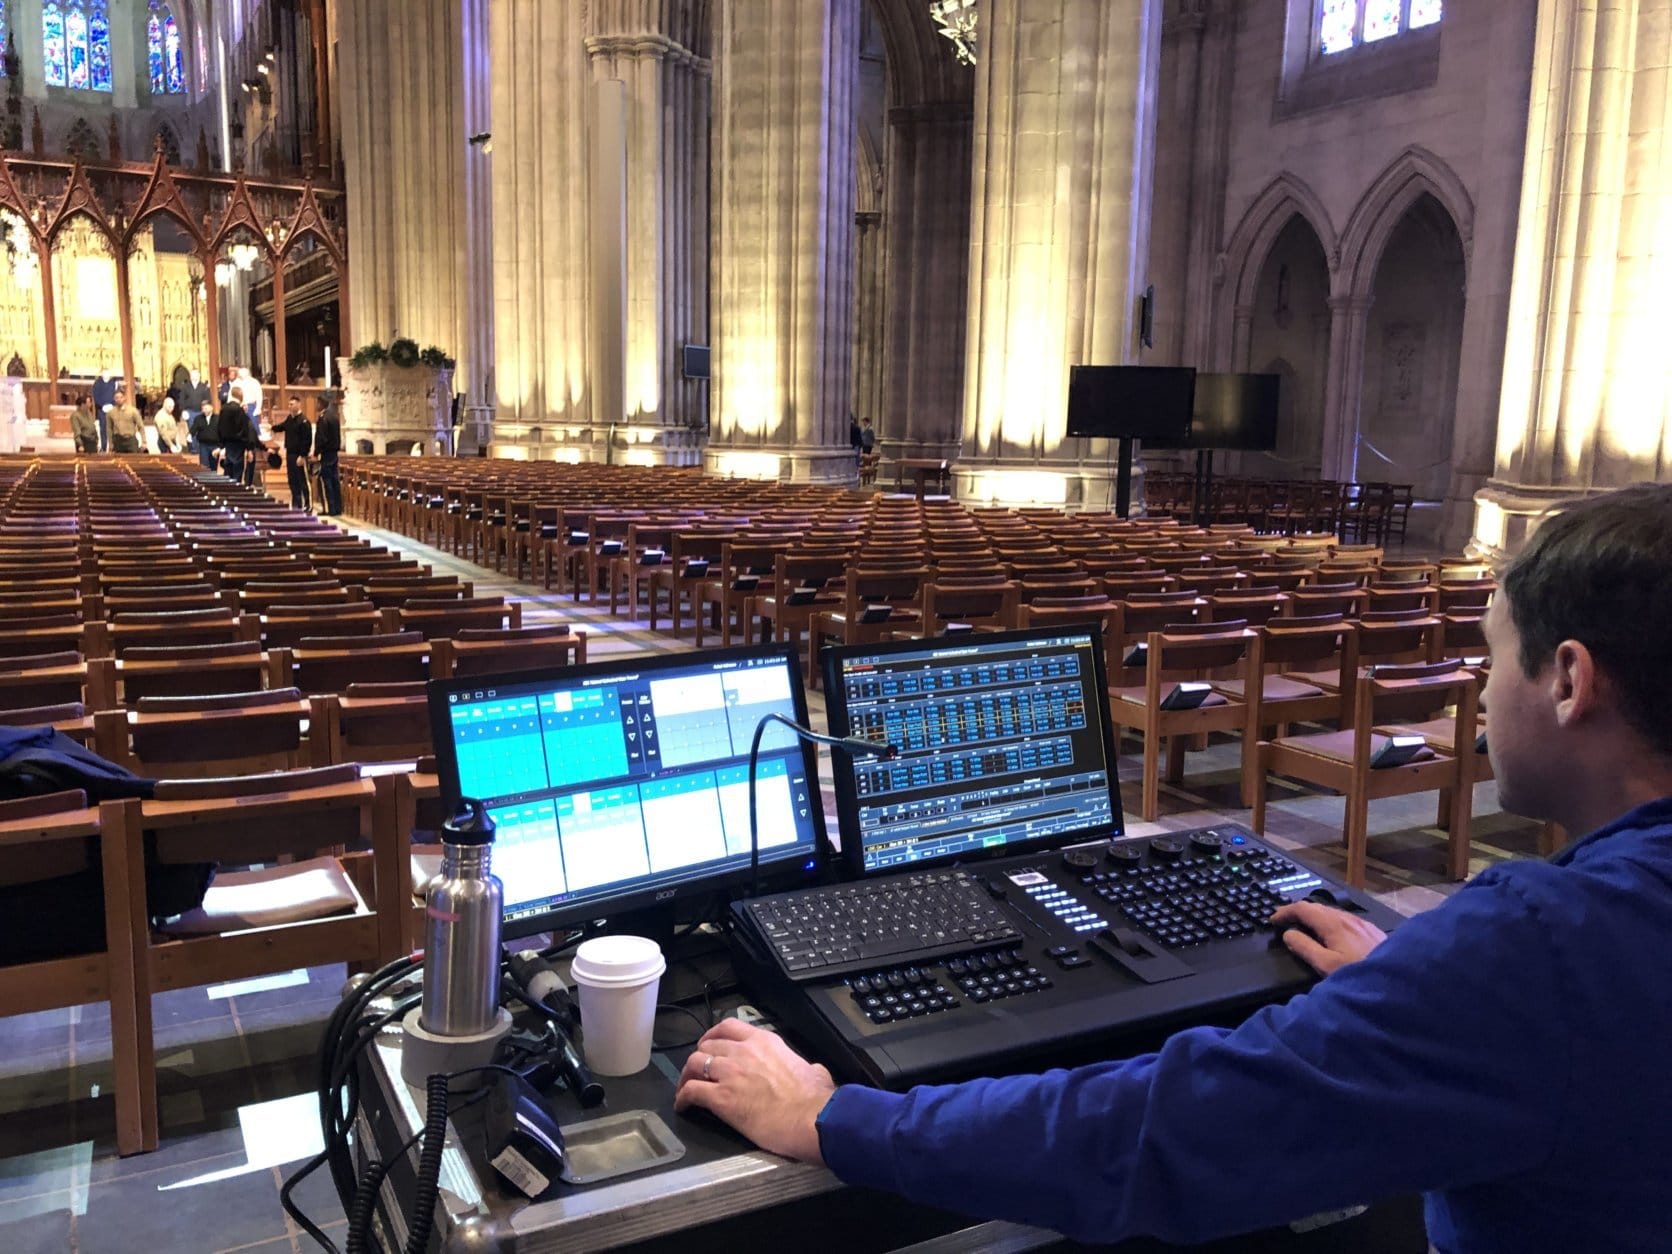 Technicians sat in front of panels tweaking adjustments on keyboards that would shape countless elements of what viewers will see and hear during Wednesday's service along the aisles, pews and alter, which was labeled as "stage." (WTOP/Kristi King)